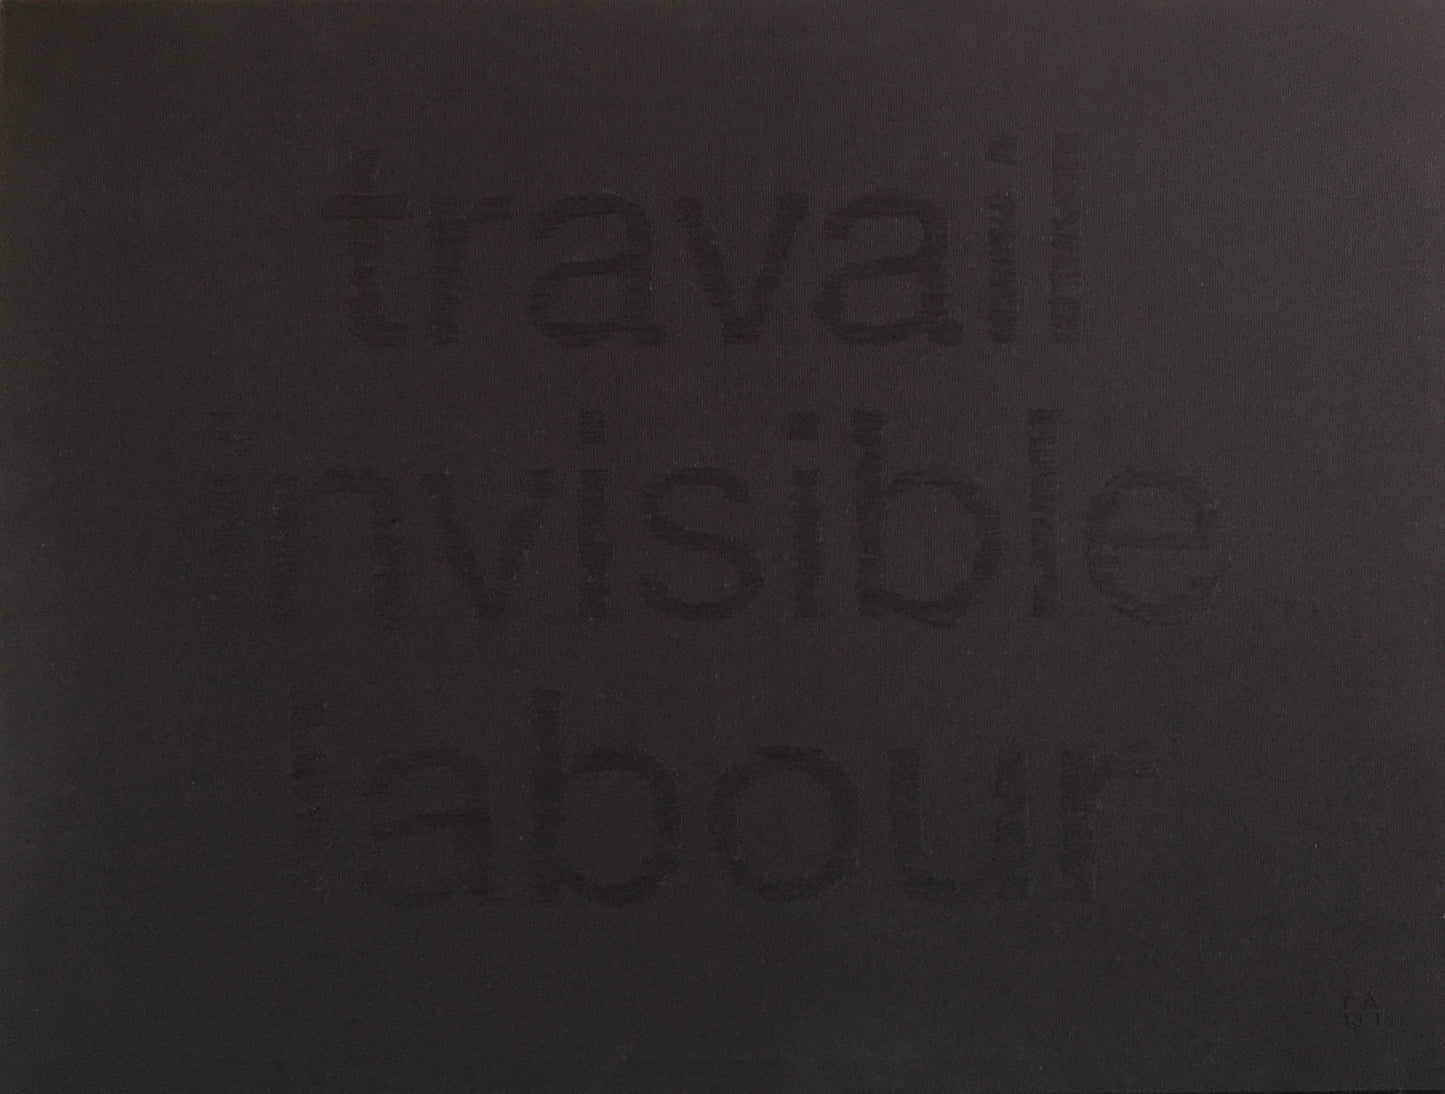 Tribute to my mother II (travail/invisible/labour)